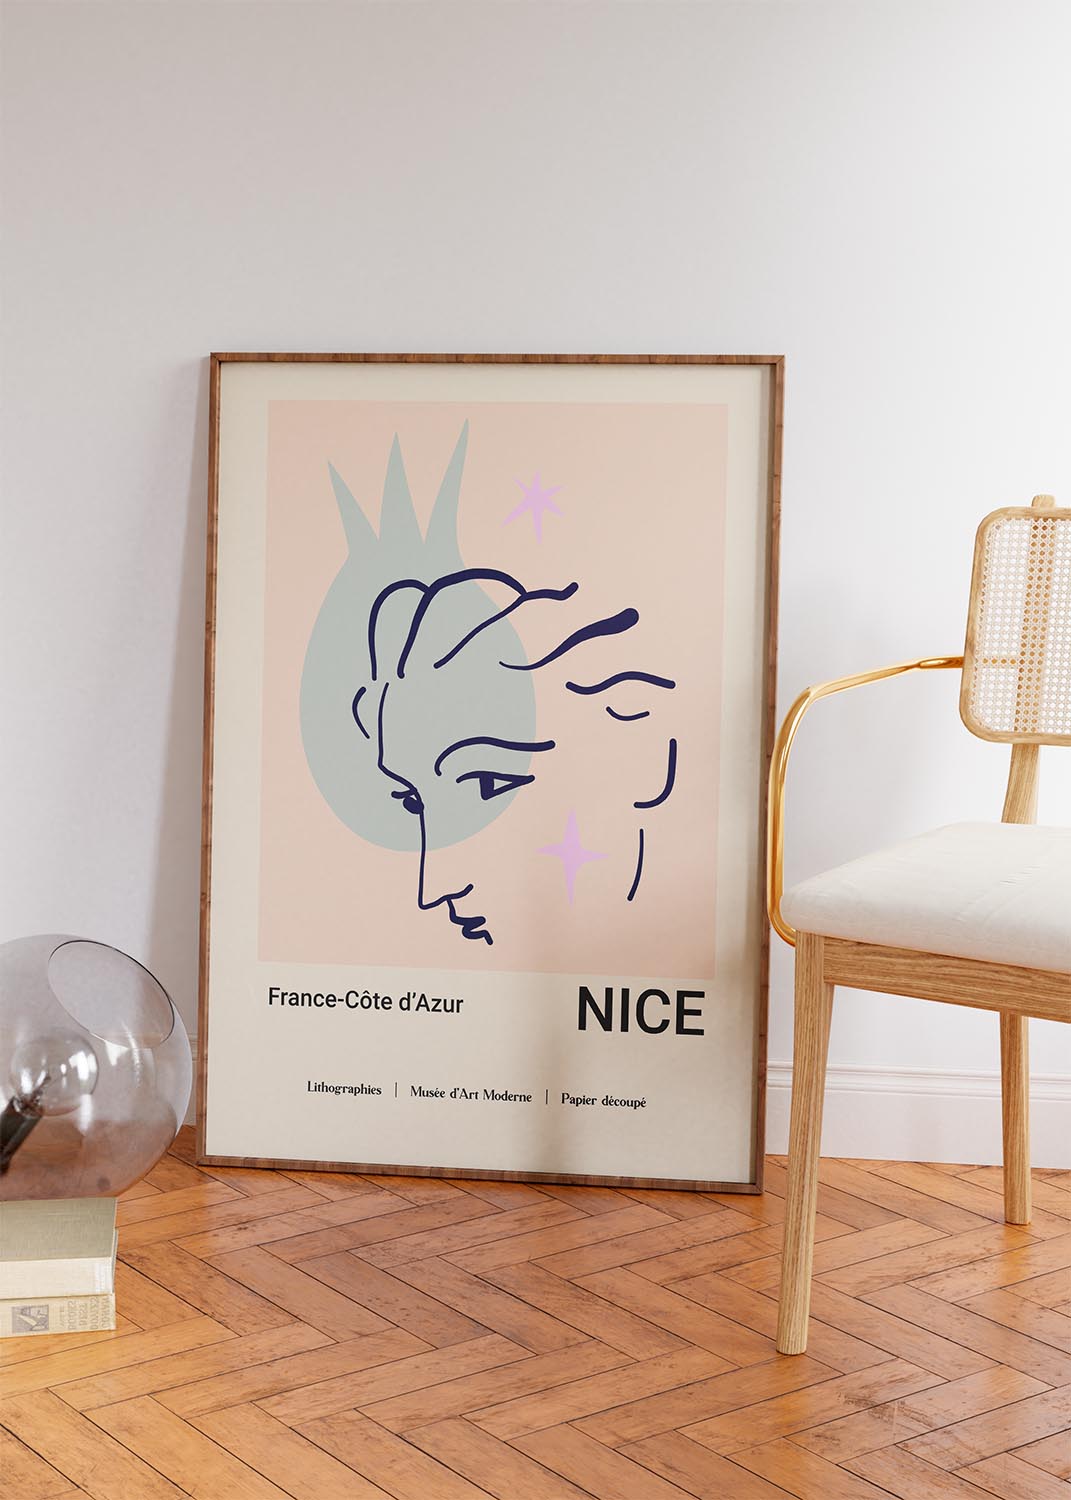 Interior design featuring a framed poster with a Matisse-inspired 'Papiers Découpés' design, depicting a stylized blue profile and pink stars against a peach backdrop, with 'NICE France-Côte d'Azur' text, elegantly placed next to a wooden chair and glass table lamp